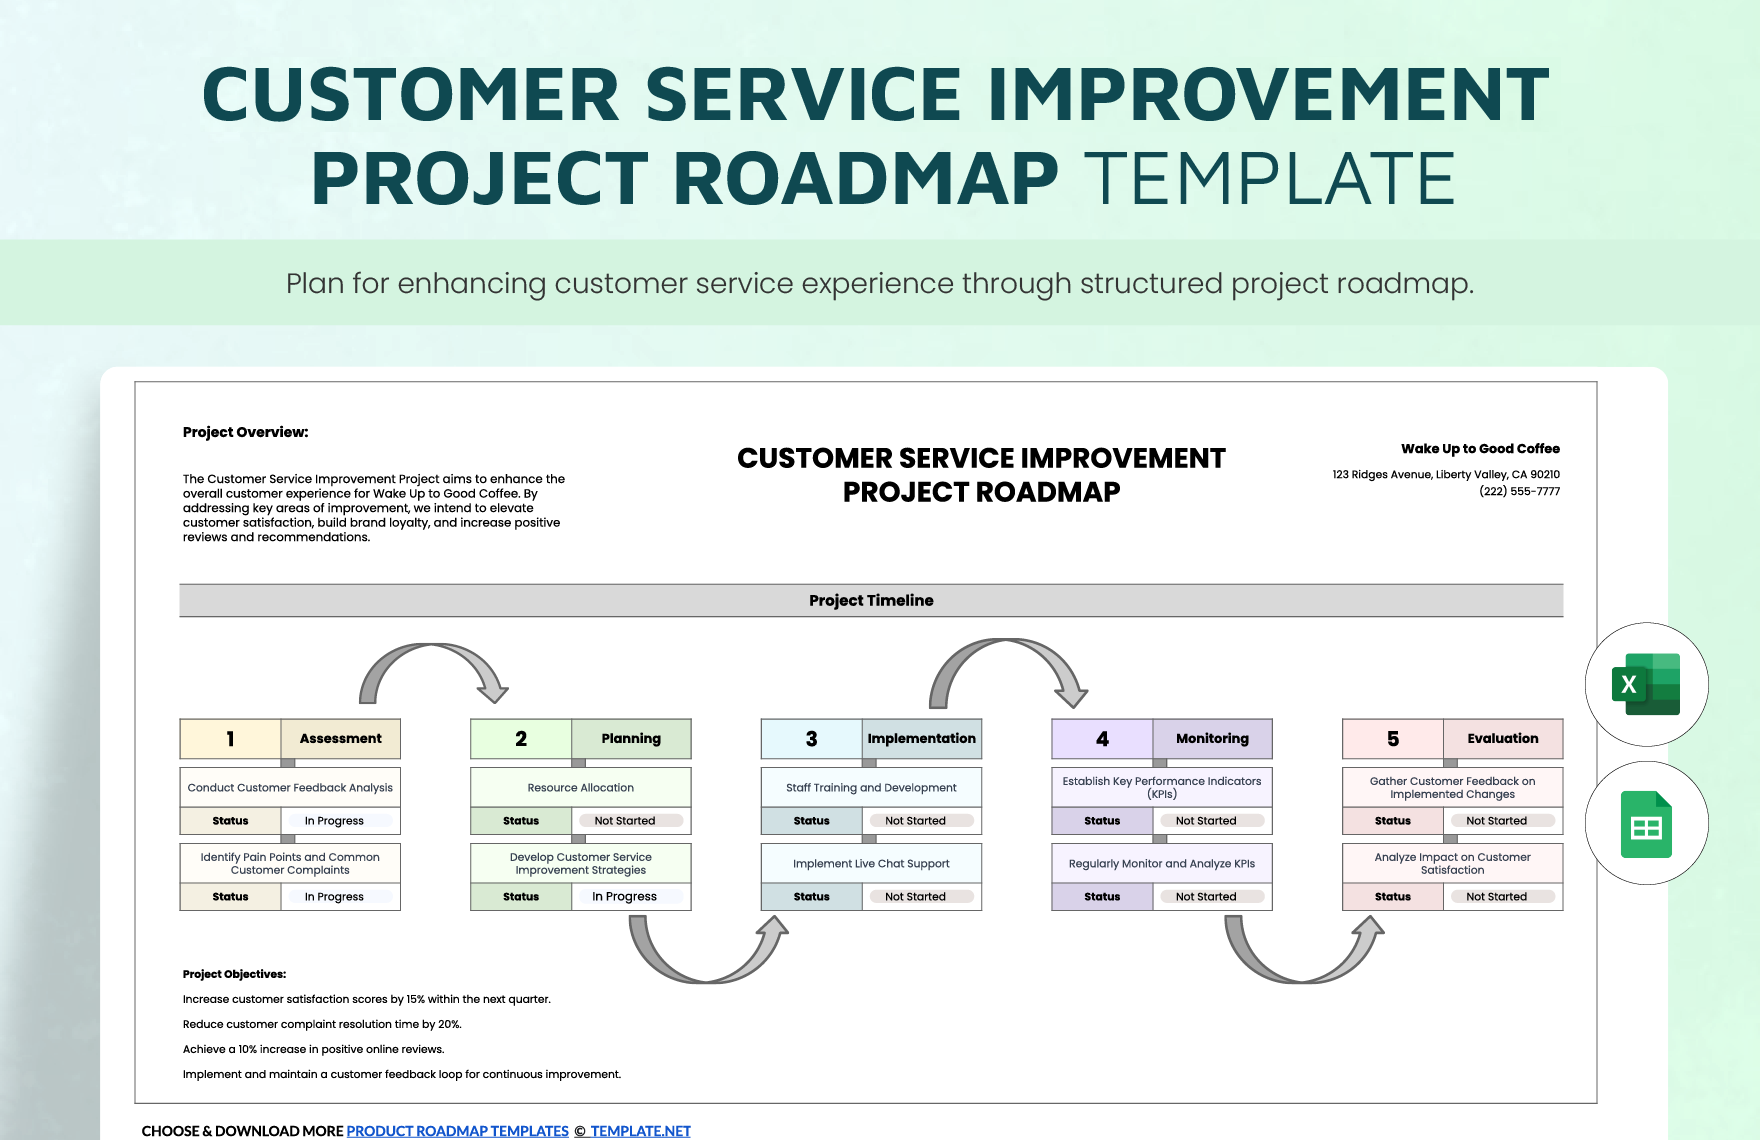 Free Customer Service Improvement Project Roadmap Template in Excel, Google Sheets